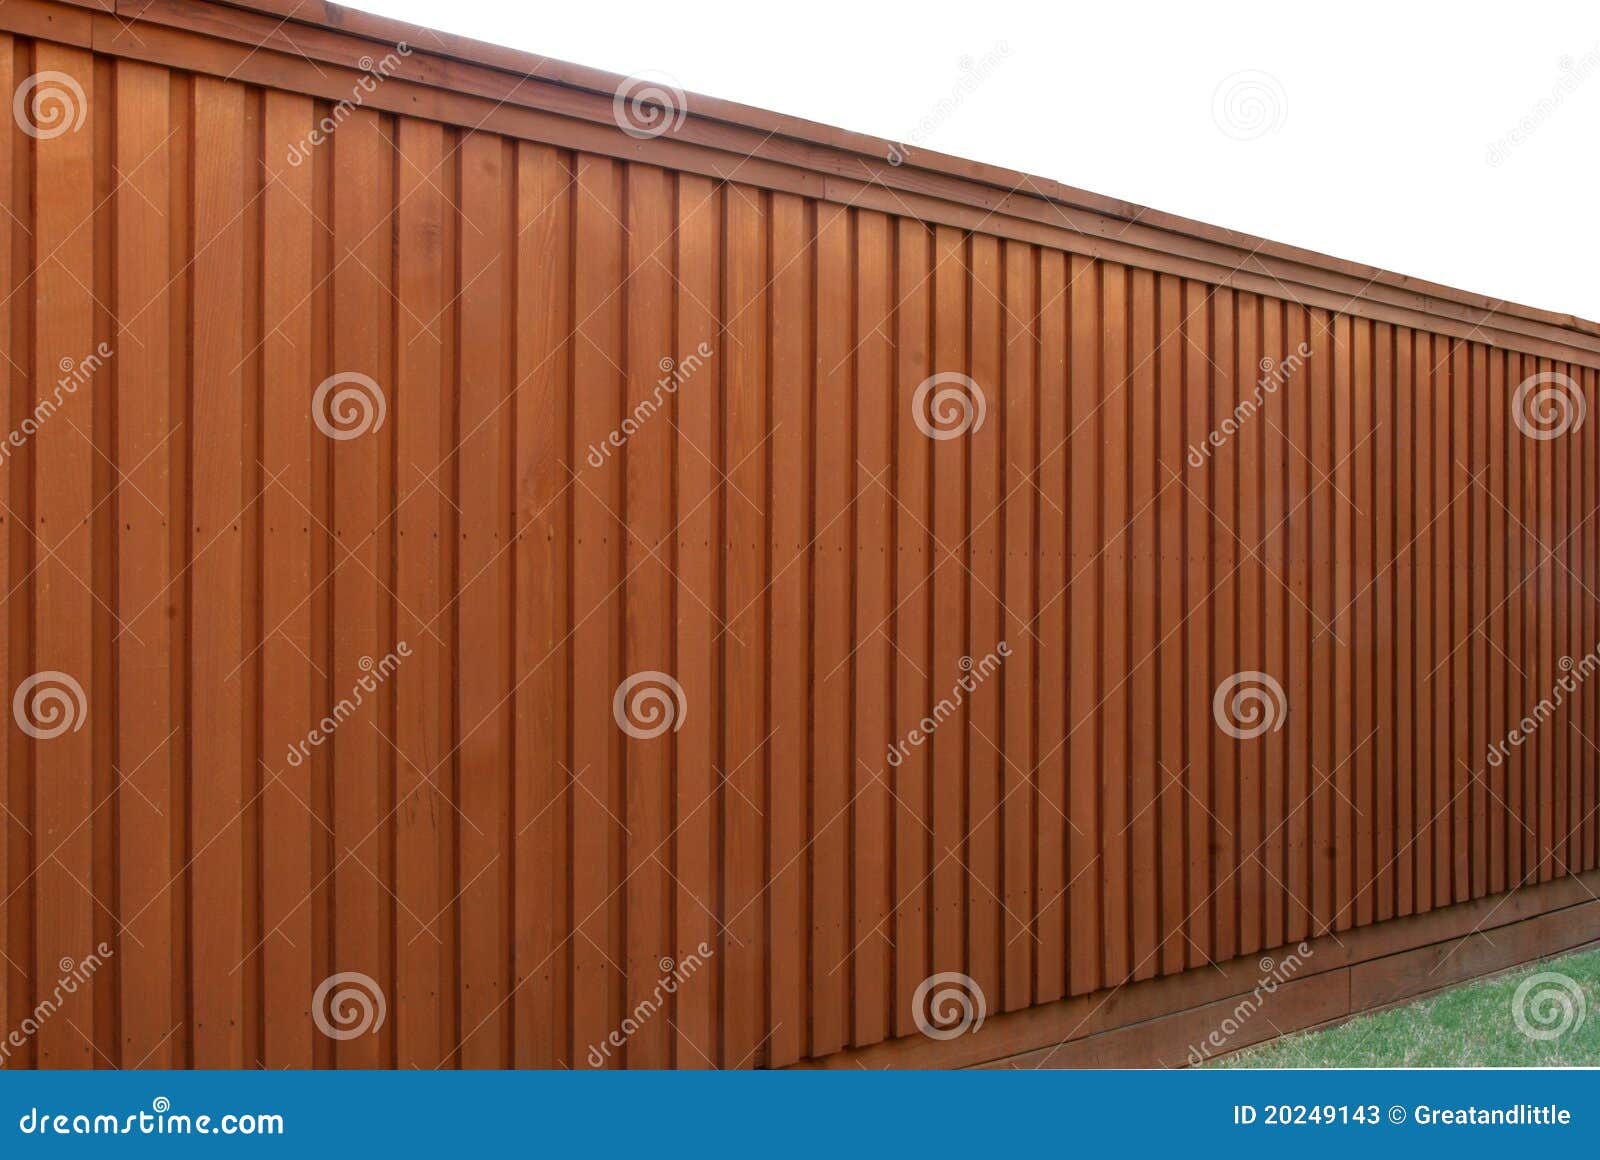 angled view of a wood fence